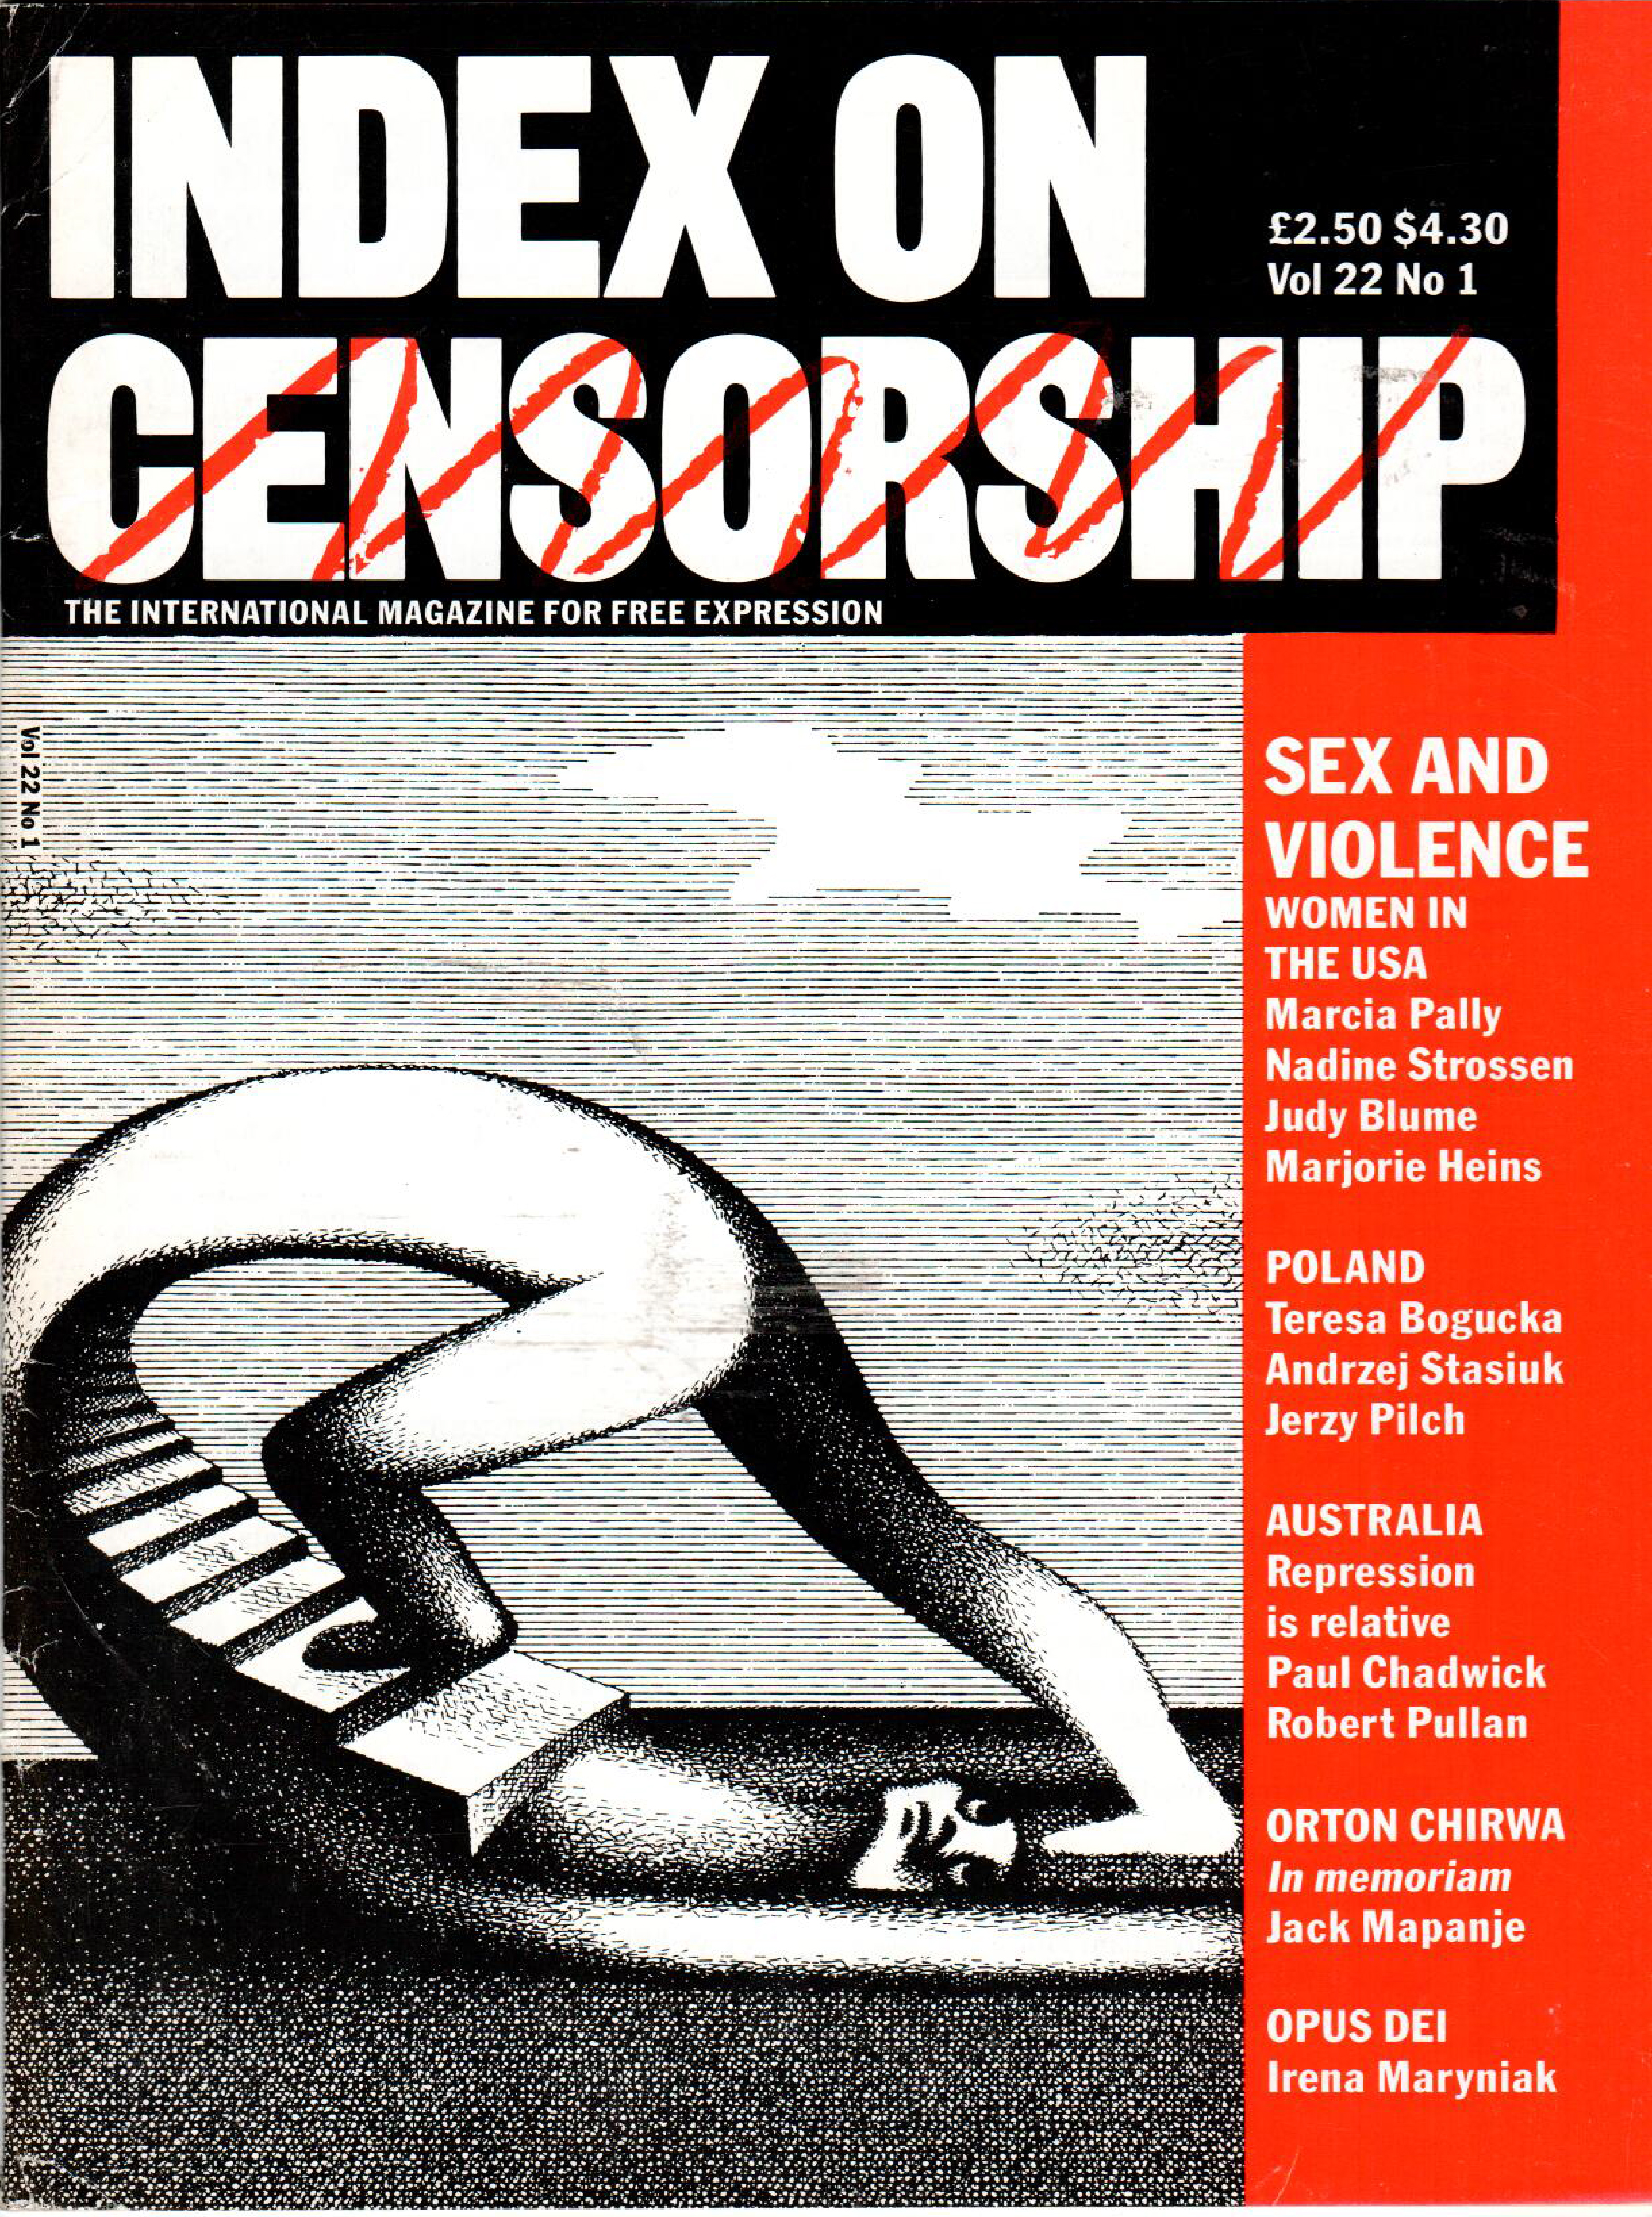 Sex and violence, the January 1993 issue of Index on Censorship magazine.